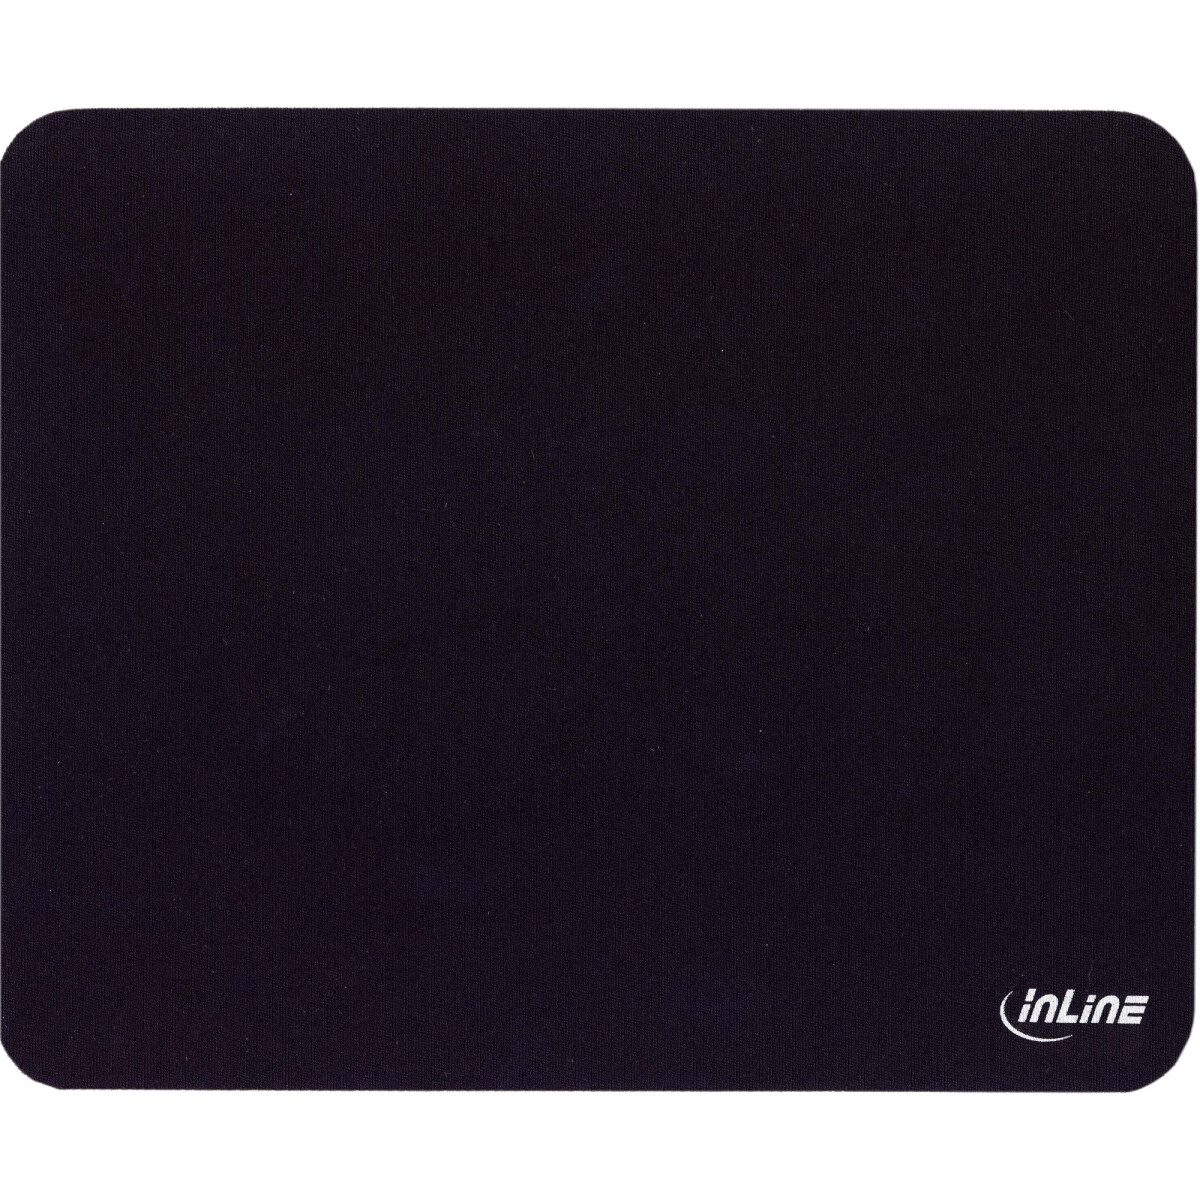 InLine® Mouse pad recycled, 230x190x3mm